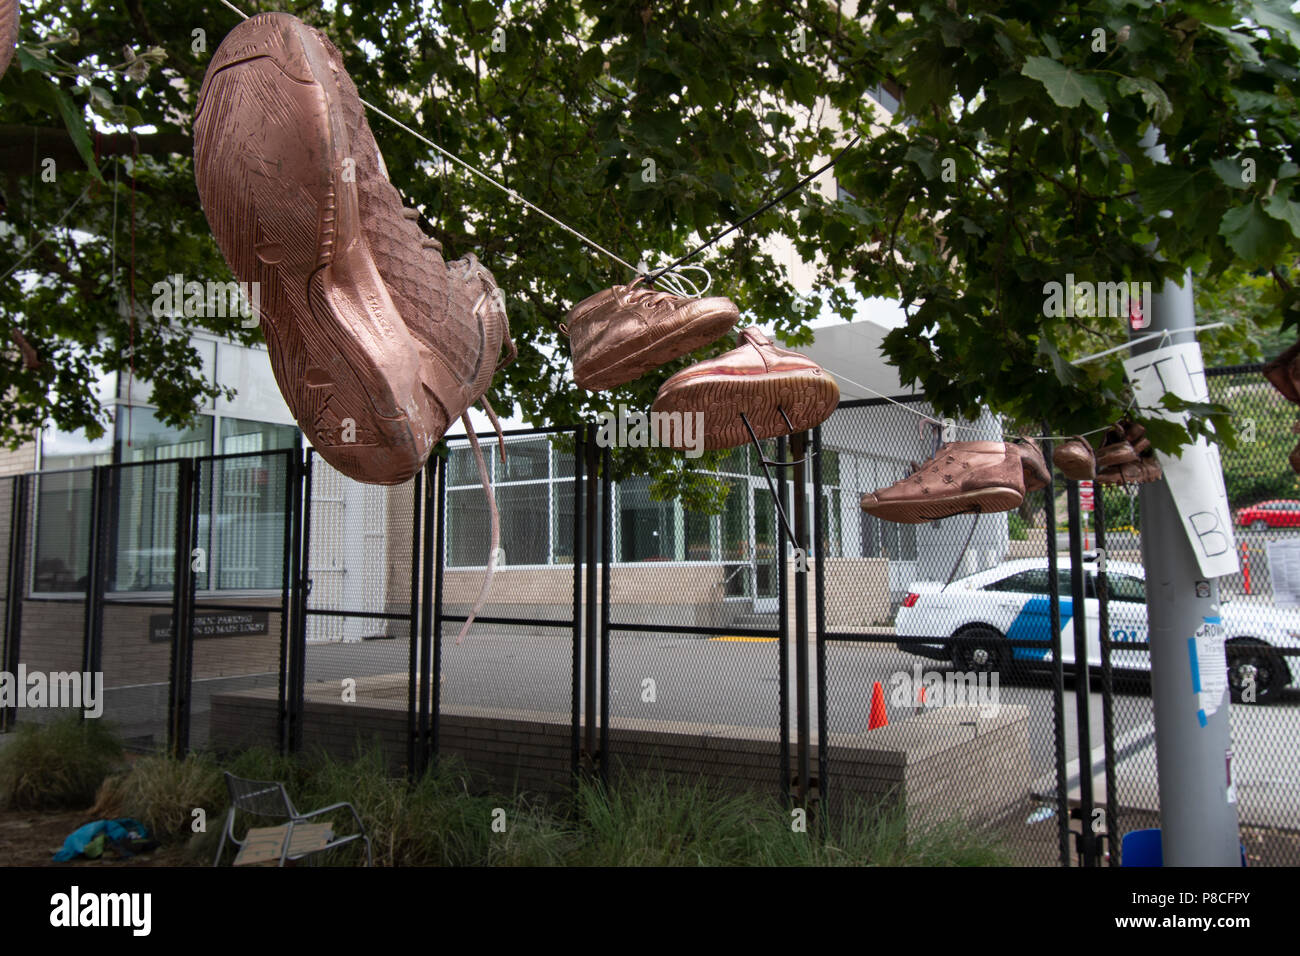 Portland, USA. 10th July, 2018. Children's shoes stung up protesting the ICE (U.S. Immigration and Customs Enforcement) child separation policy. The Portland office in the background, with the fence that violates city code. Credit: David Krug/Alamy Live News Stock Photo